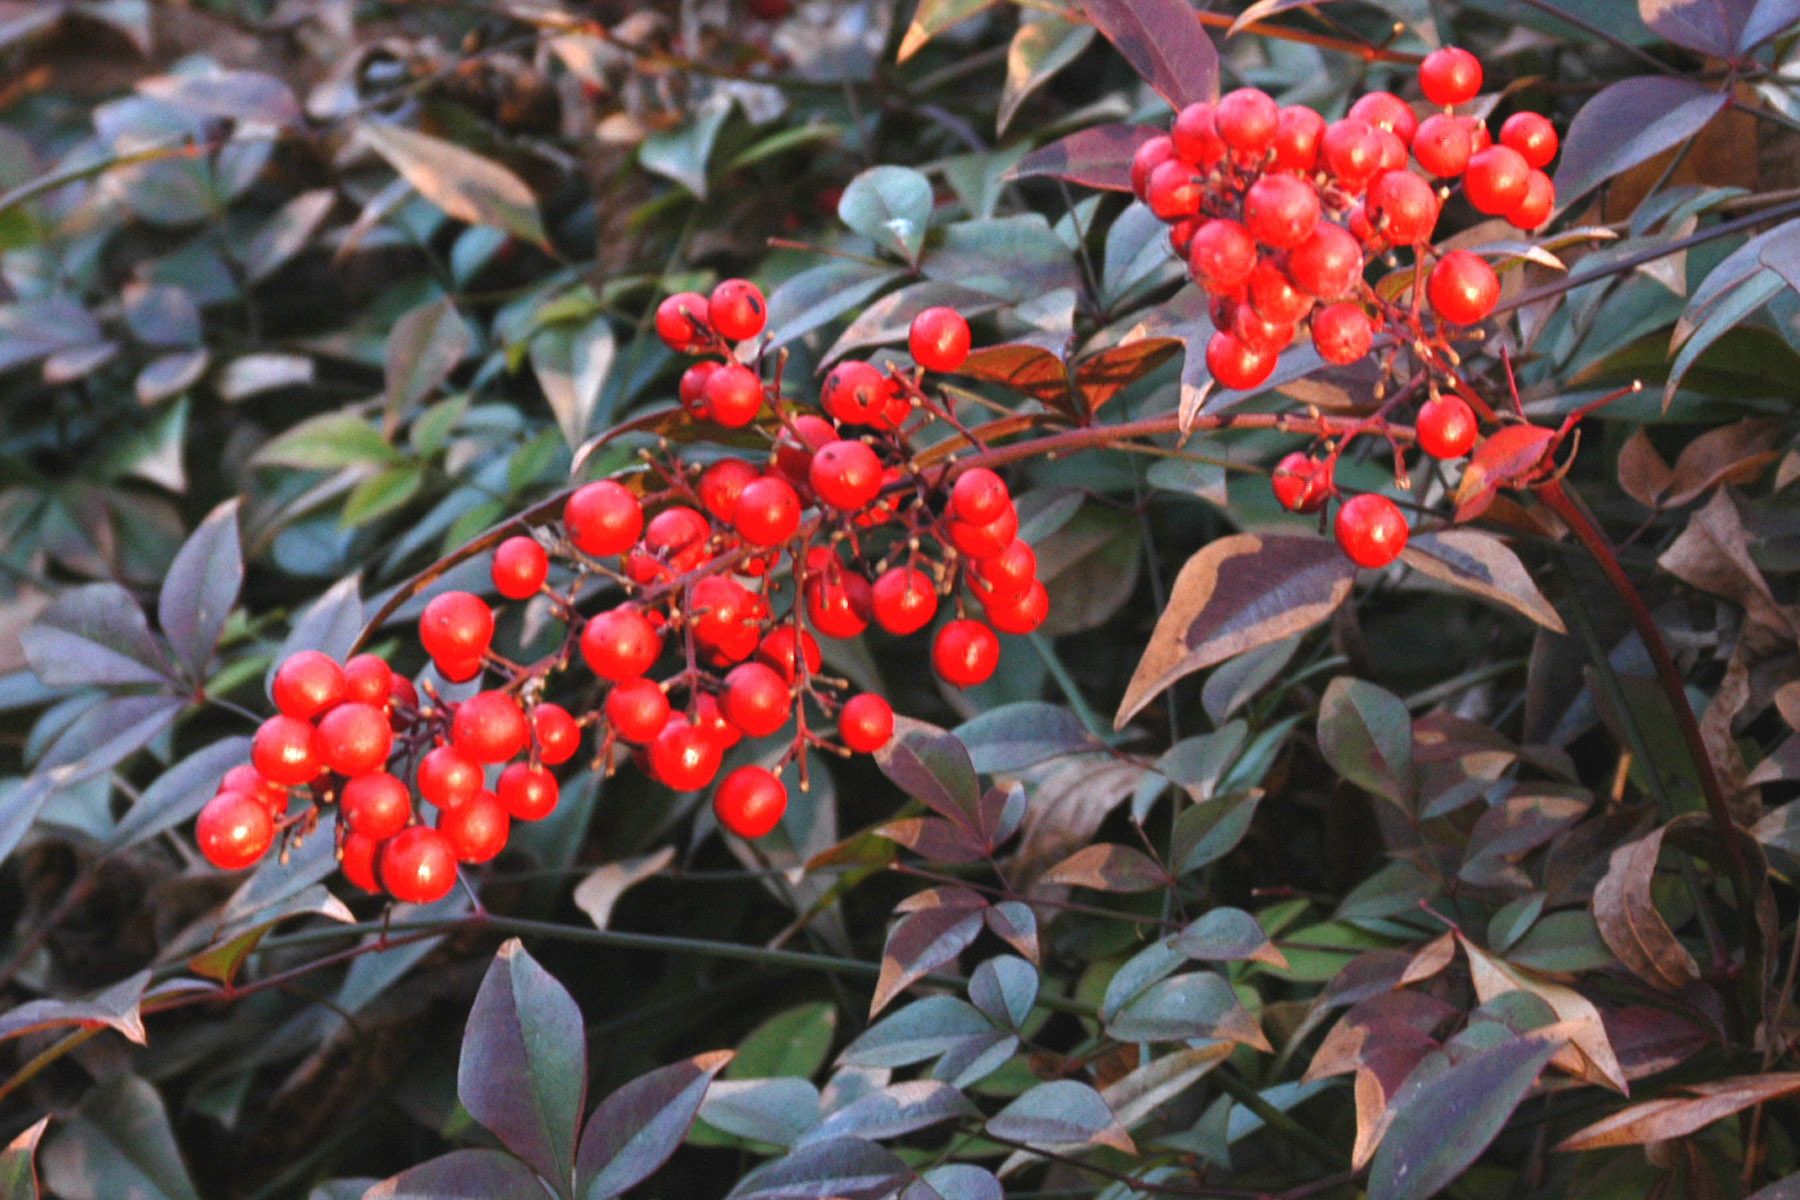 Peffley: Nandina holiday berries for a splash of color in garlands